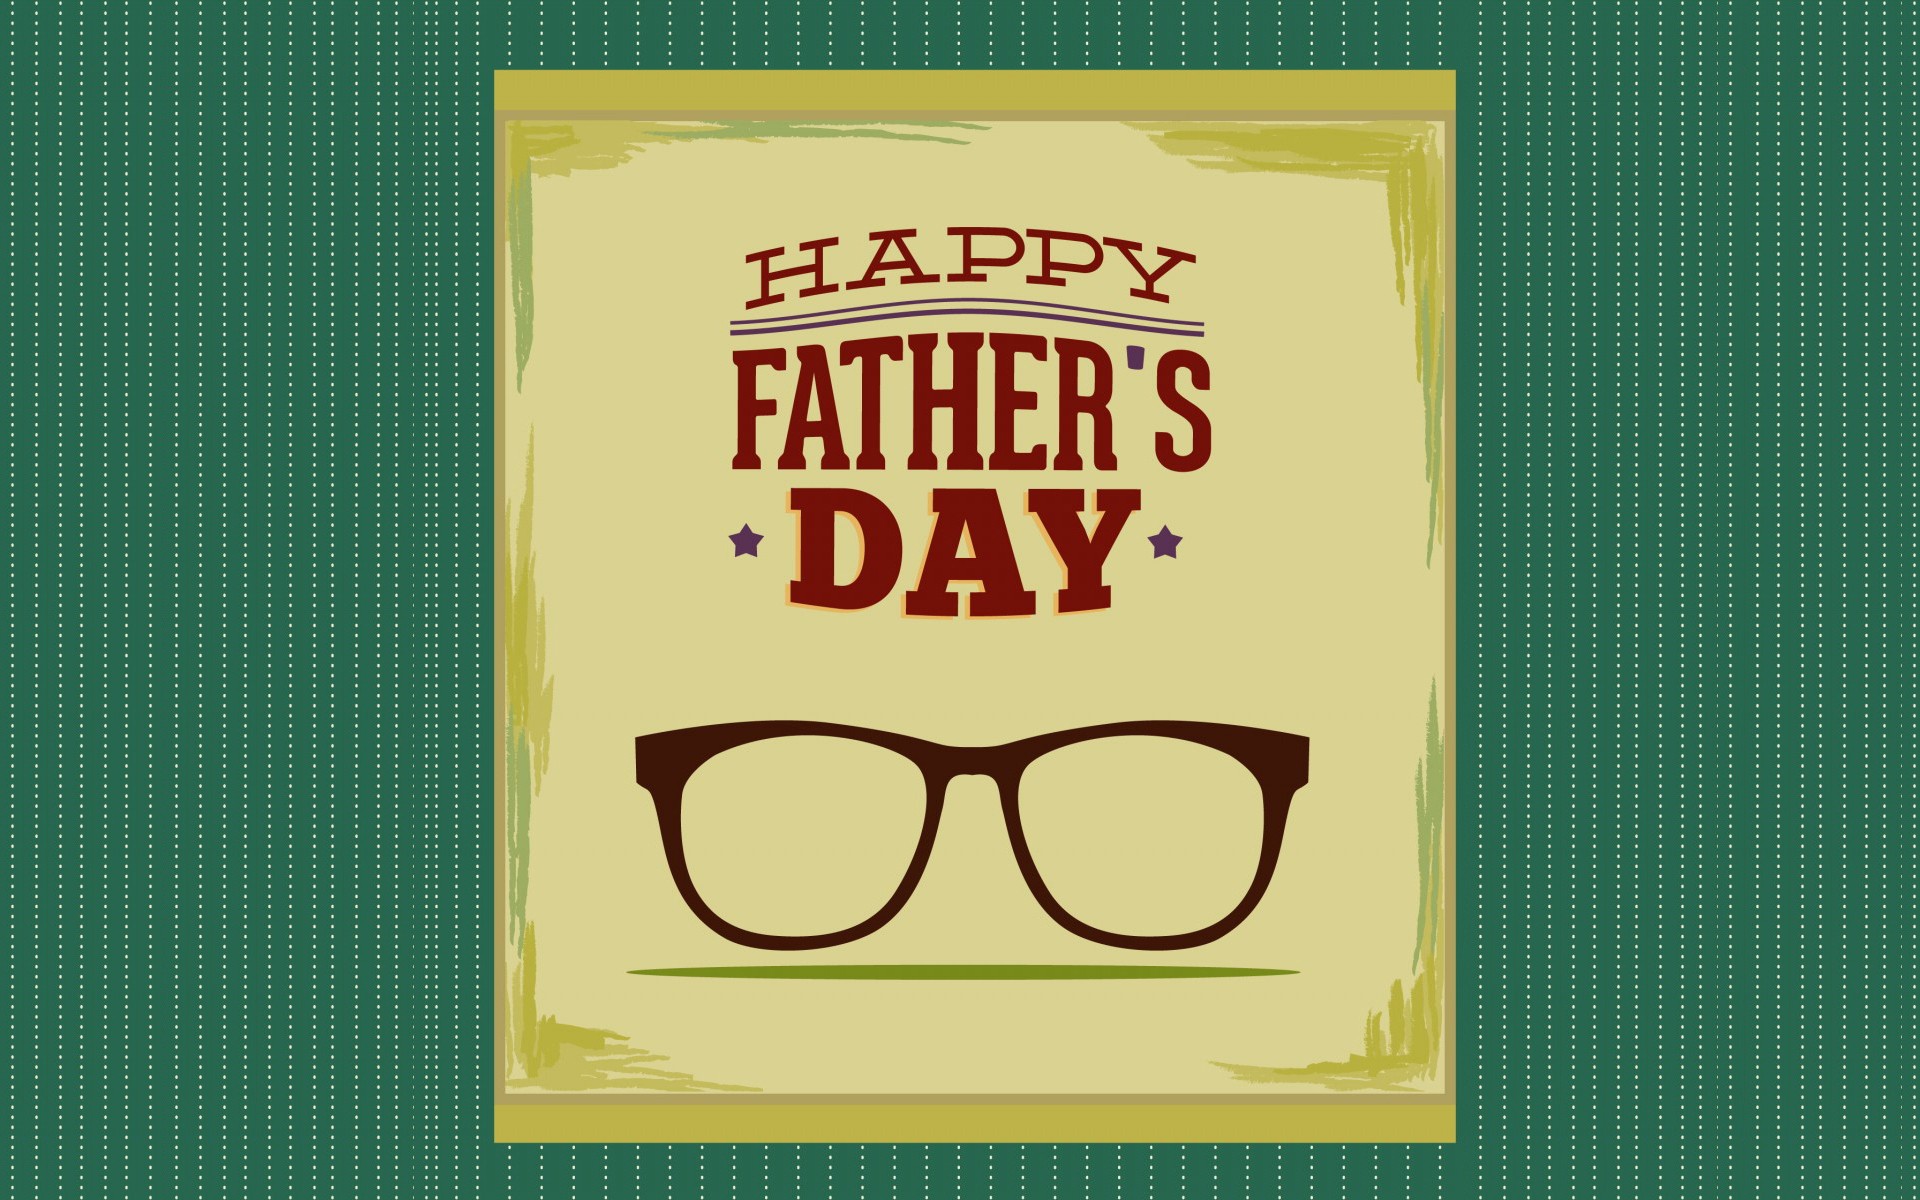 Happy Father's Day 2015